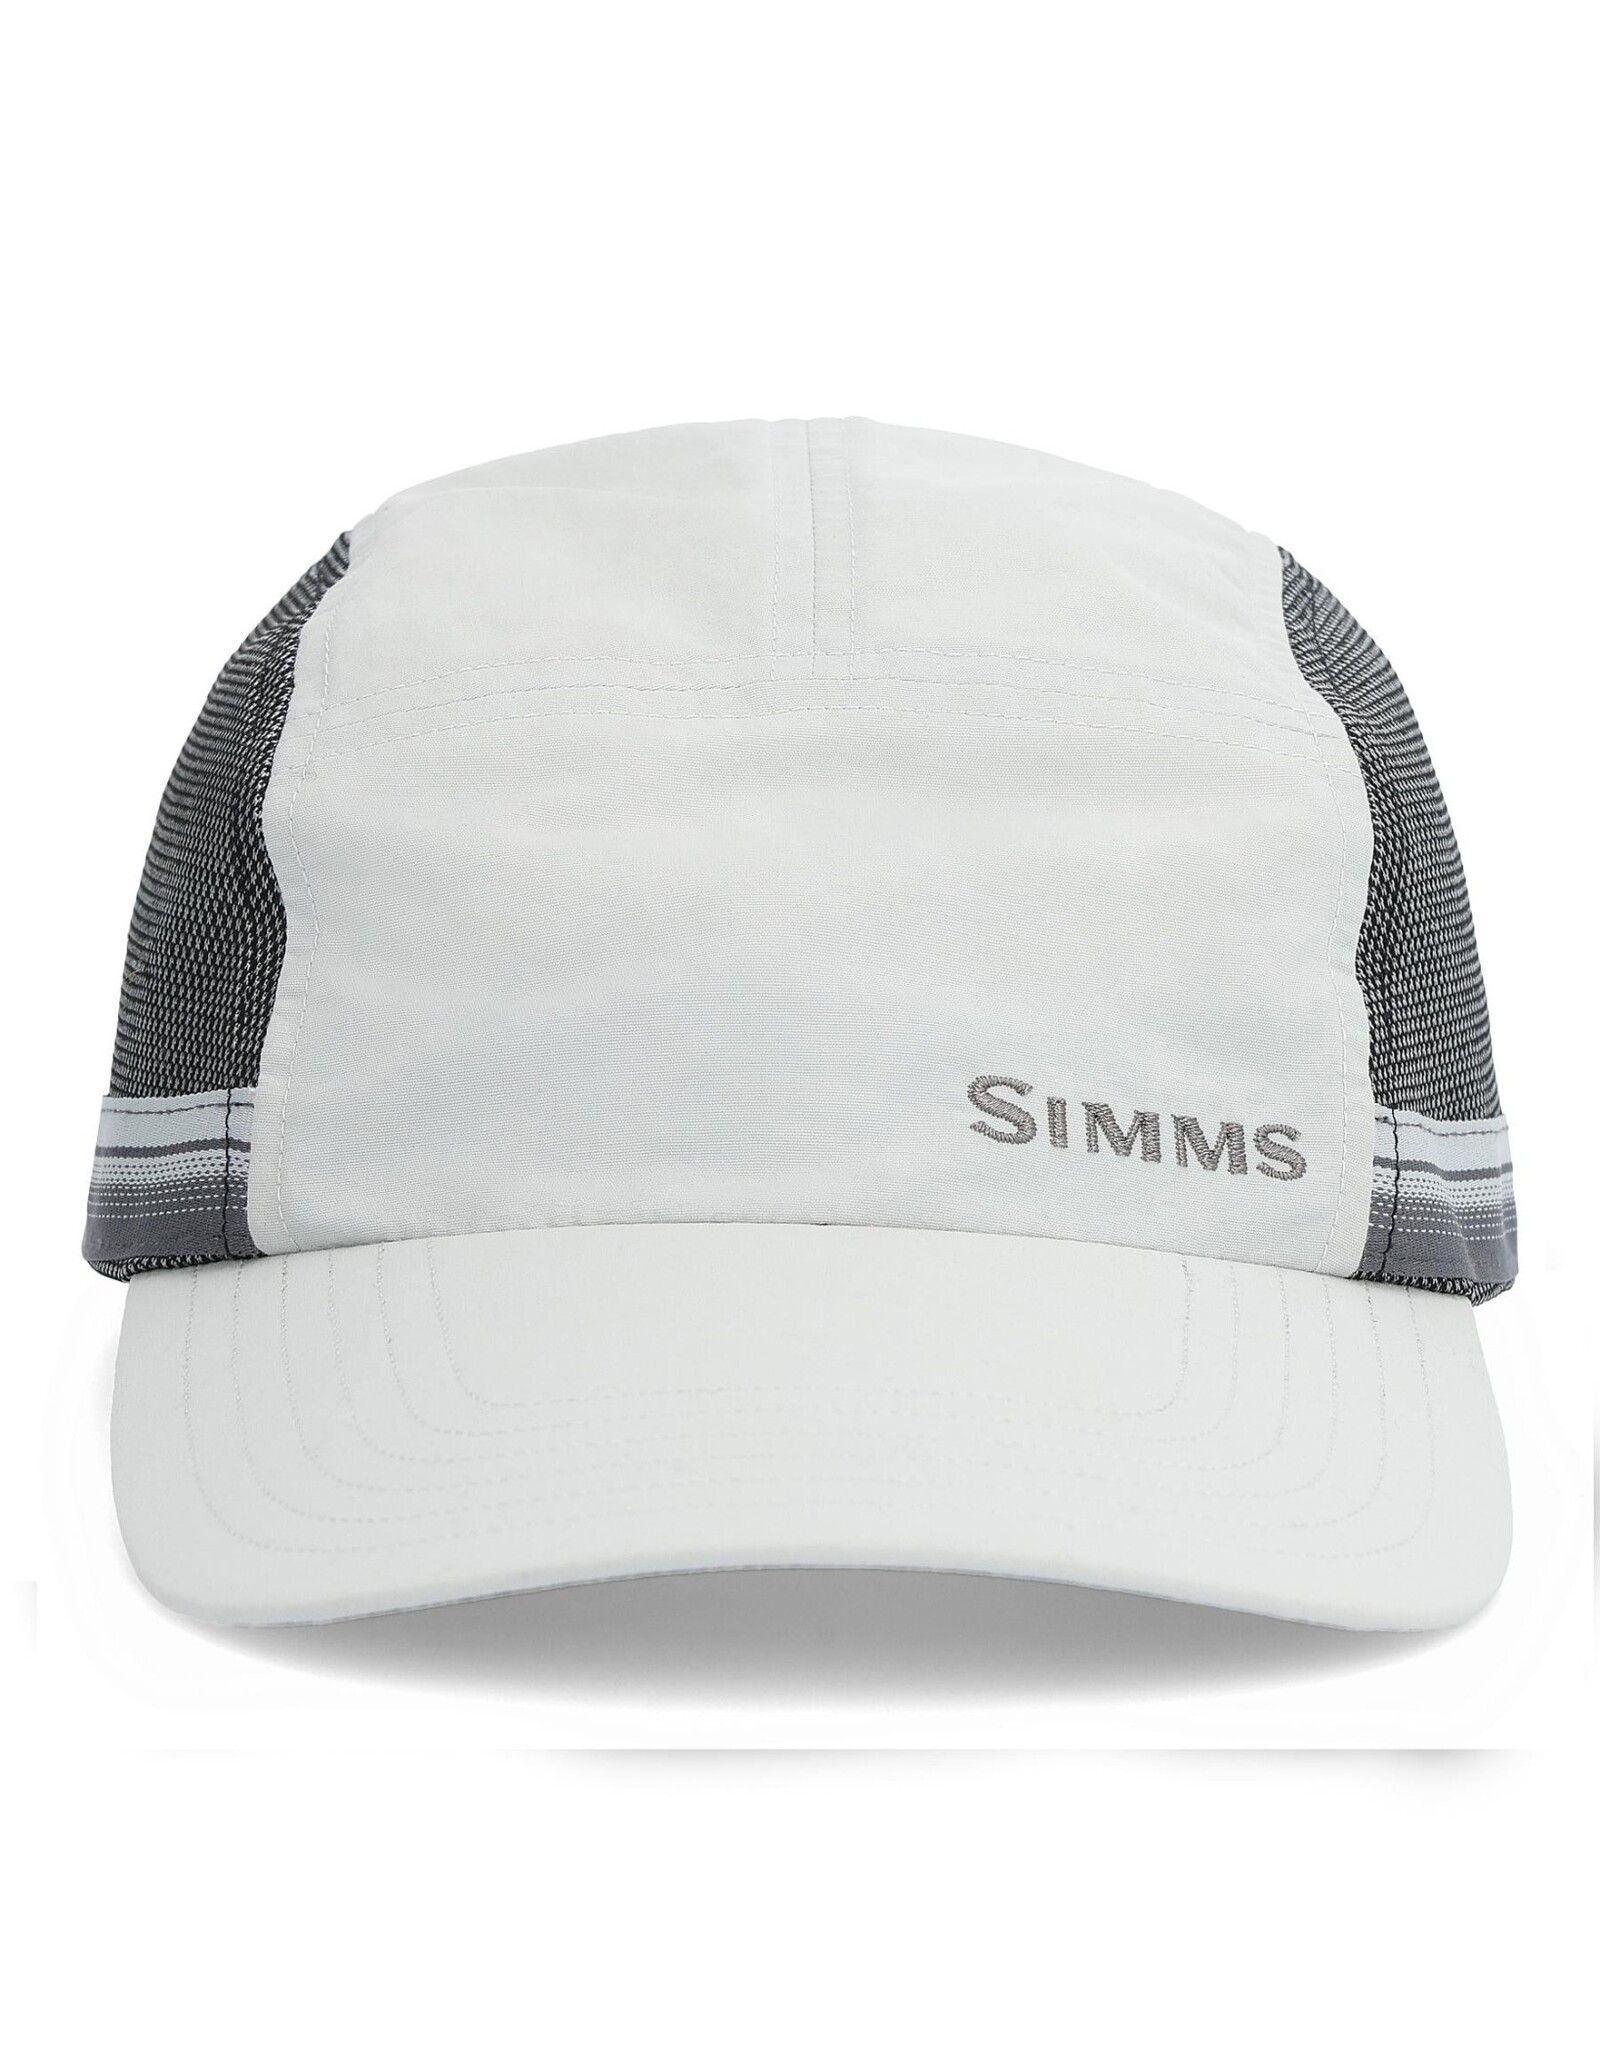 Simms Superlight Flats Cap - Royal Gorge Anglers